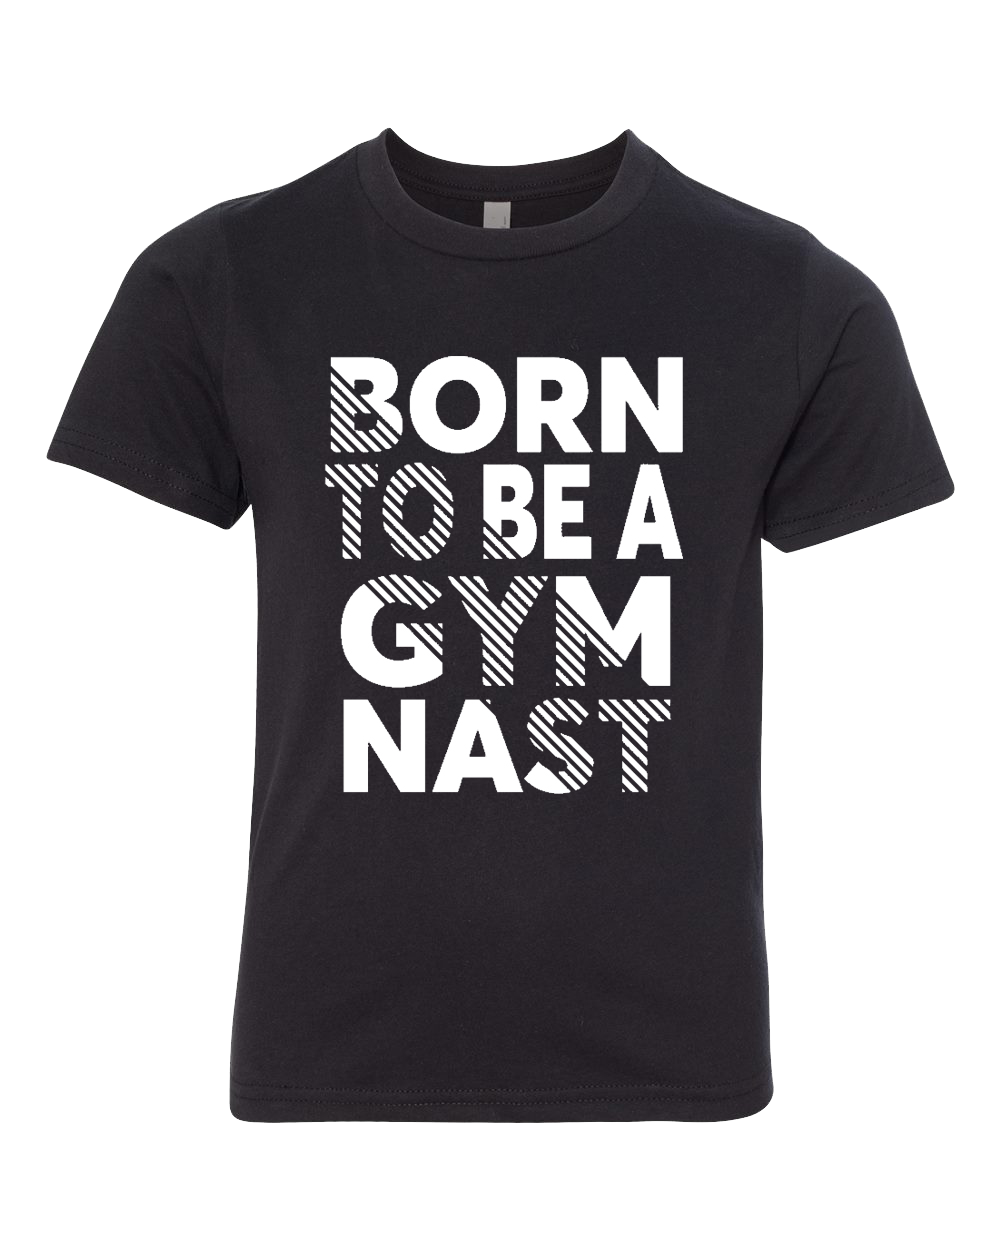 Born To Be A Gymnast Youth T-Shirt Black